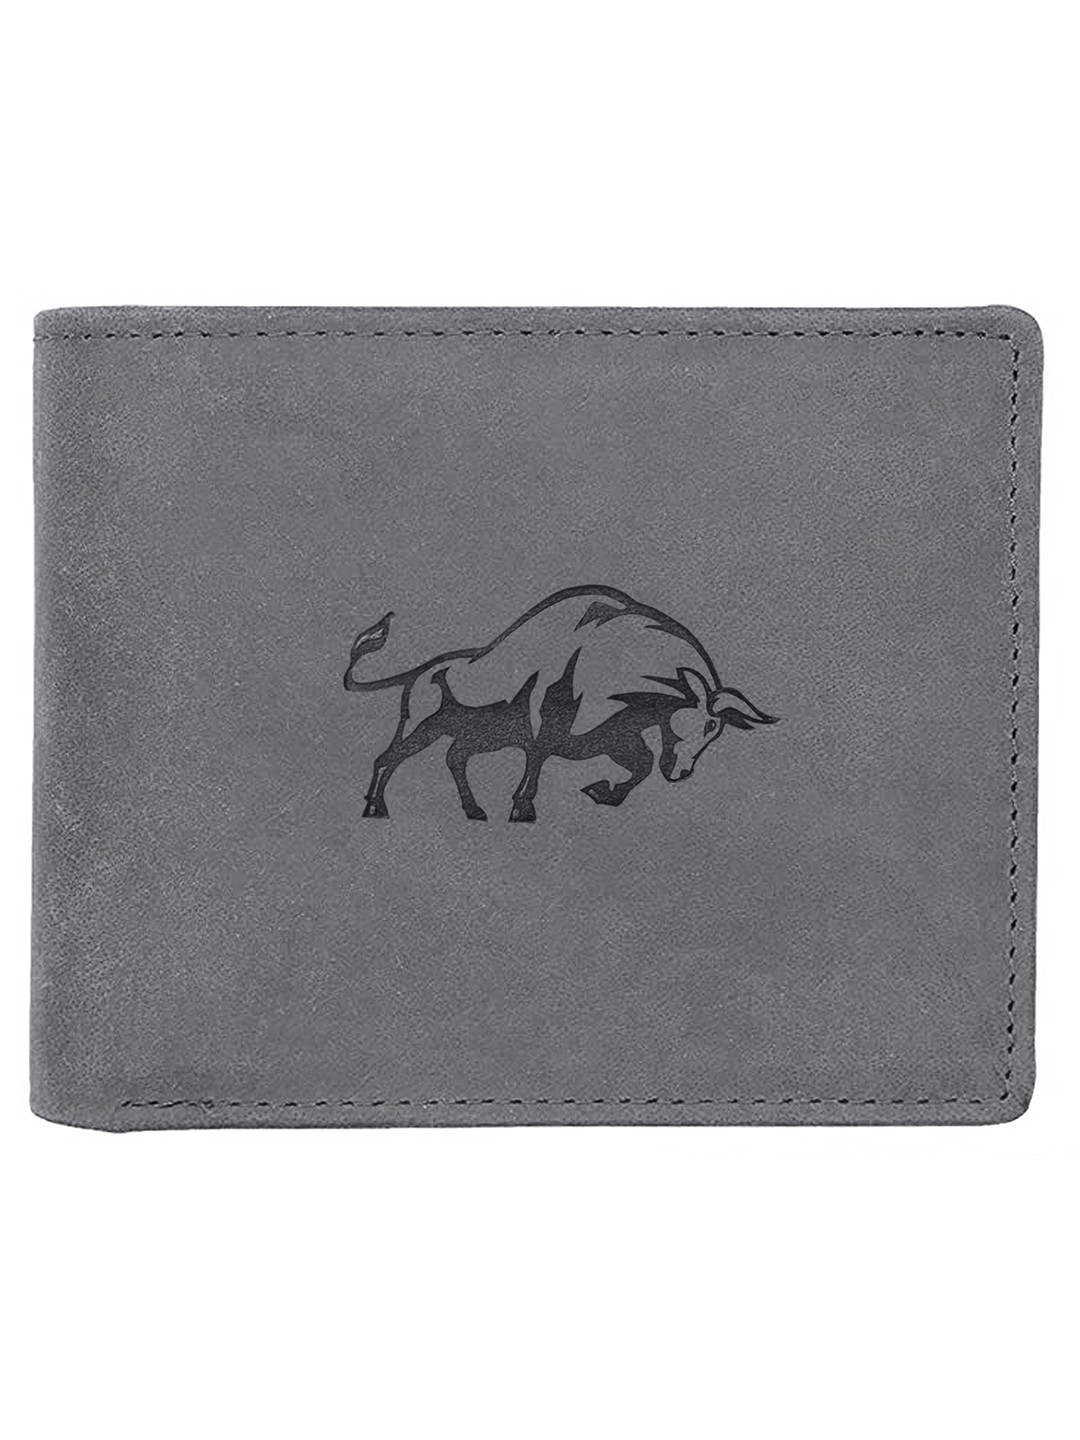 WildHorn | WildHorn RFID Protected Genuine High Quality Leather Grey Wallet for Men